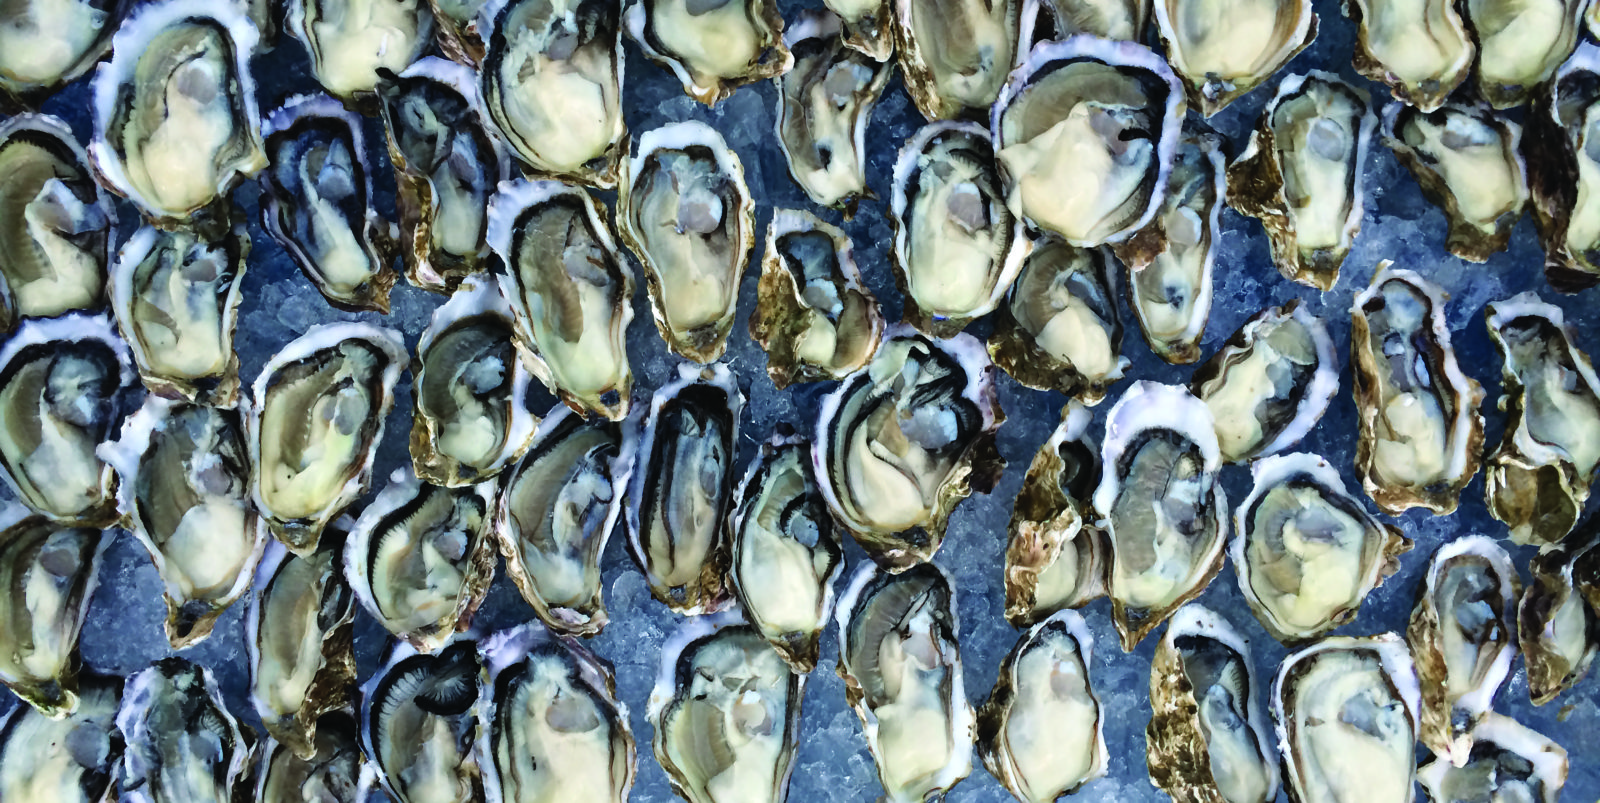 A Field Guide to Southern Oysters